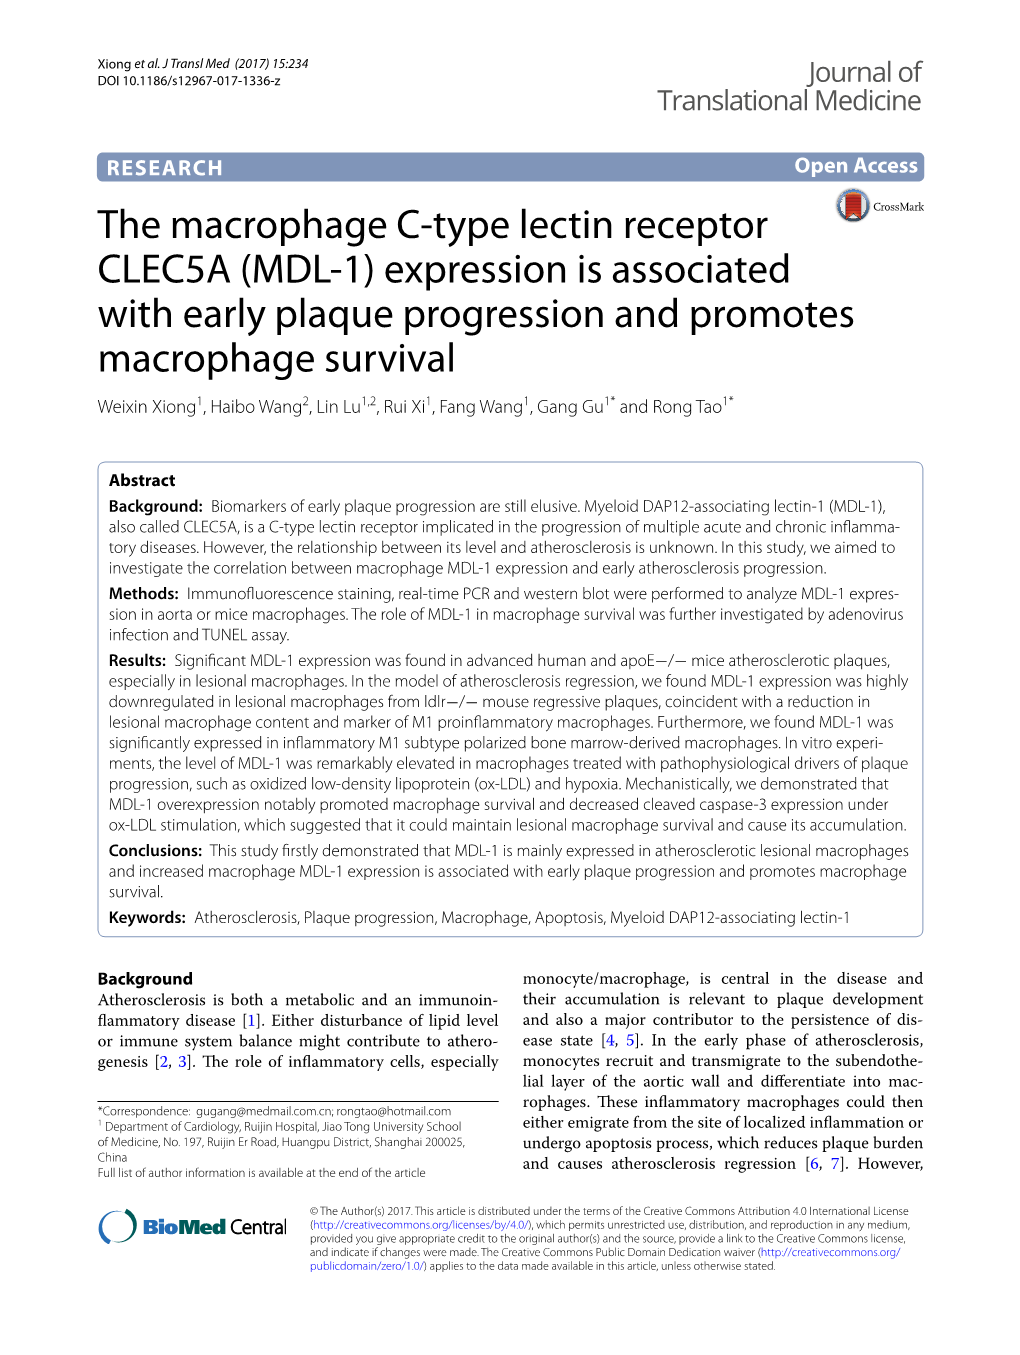 The Macrophage C-Type Lectin Receptor CLEC5A (MDL-1